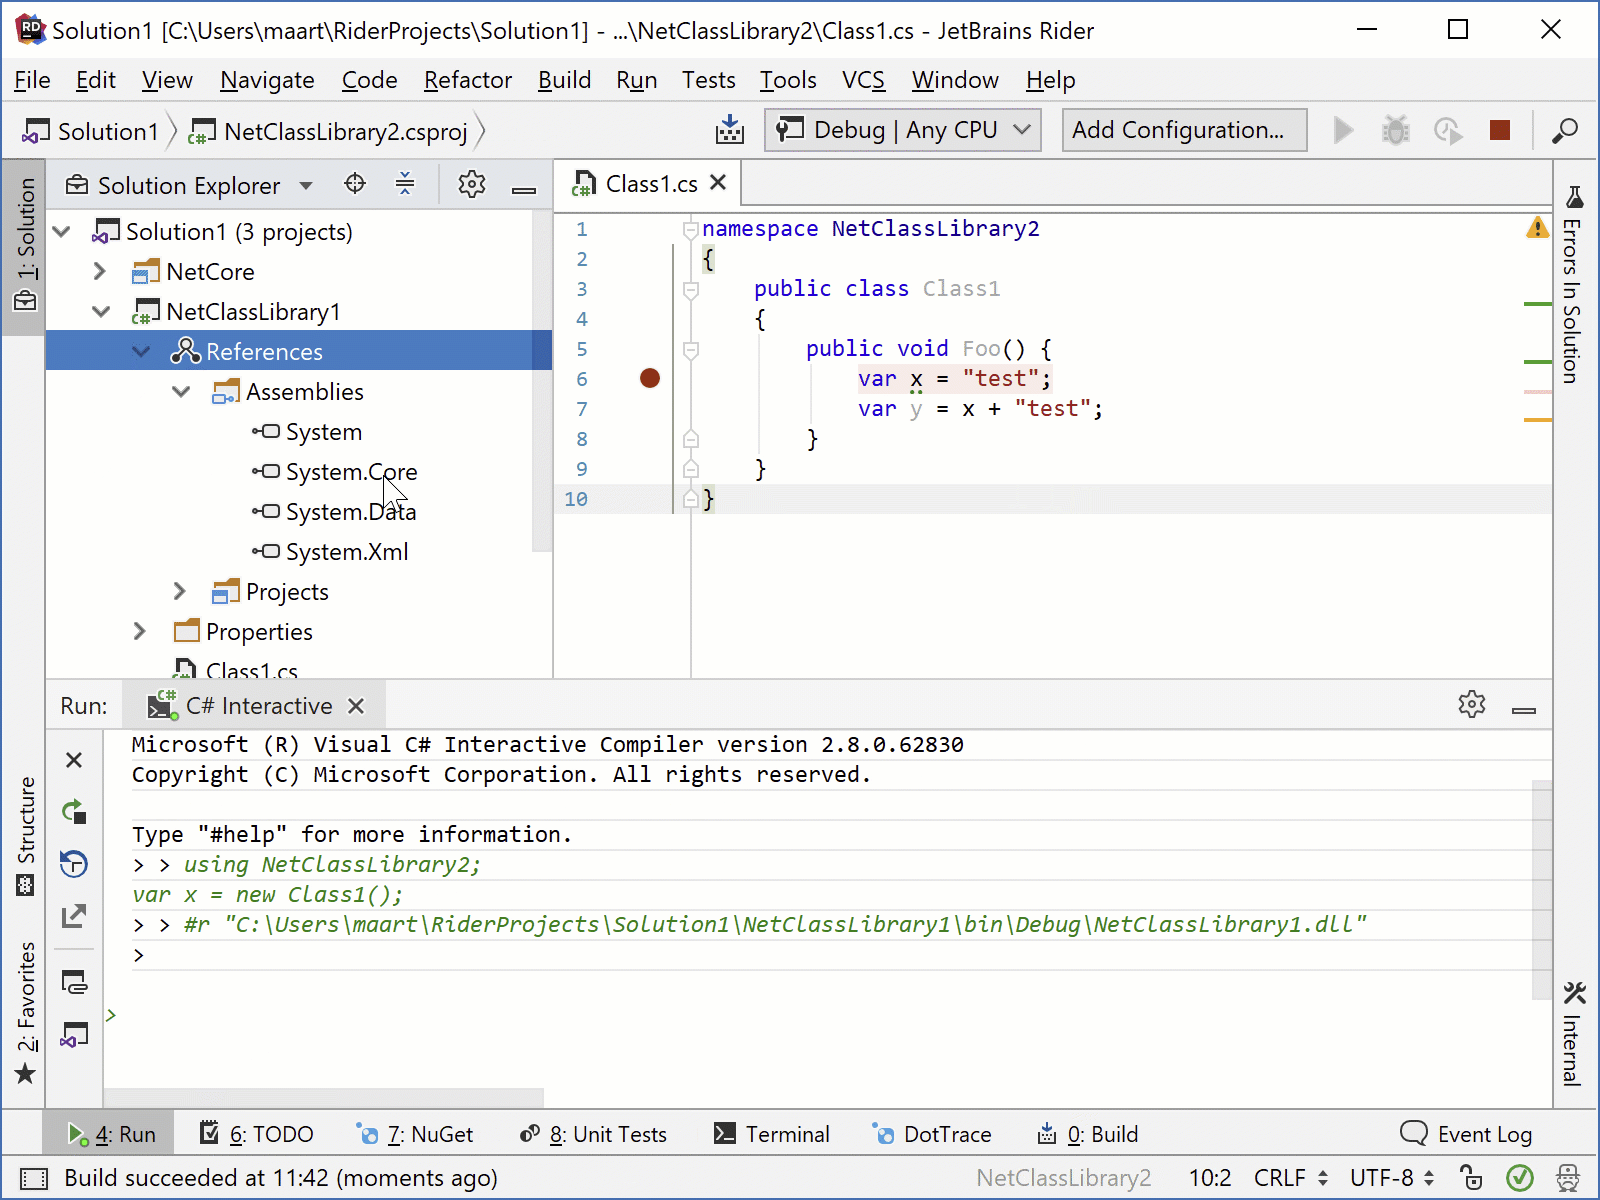 JetBrains Rider: Attaching C# Interactive to the debugger